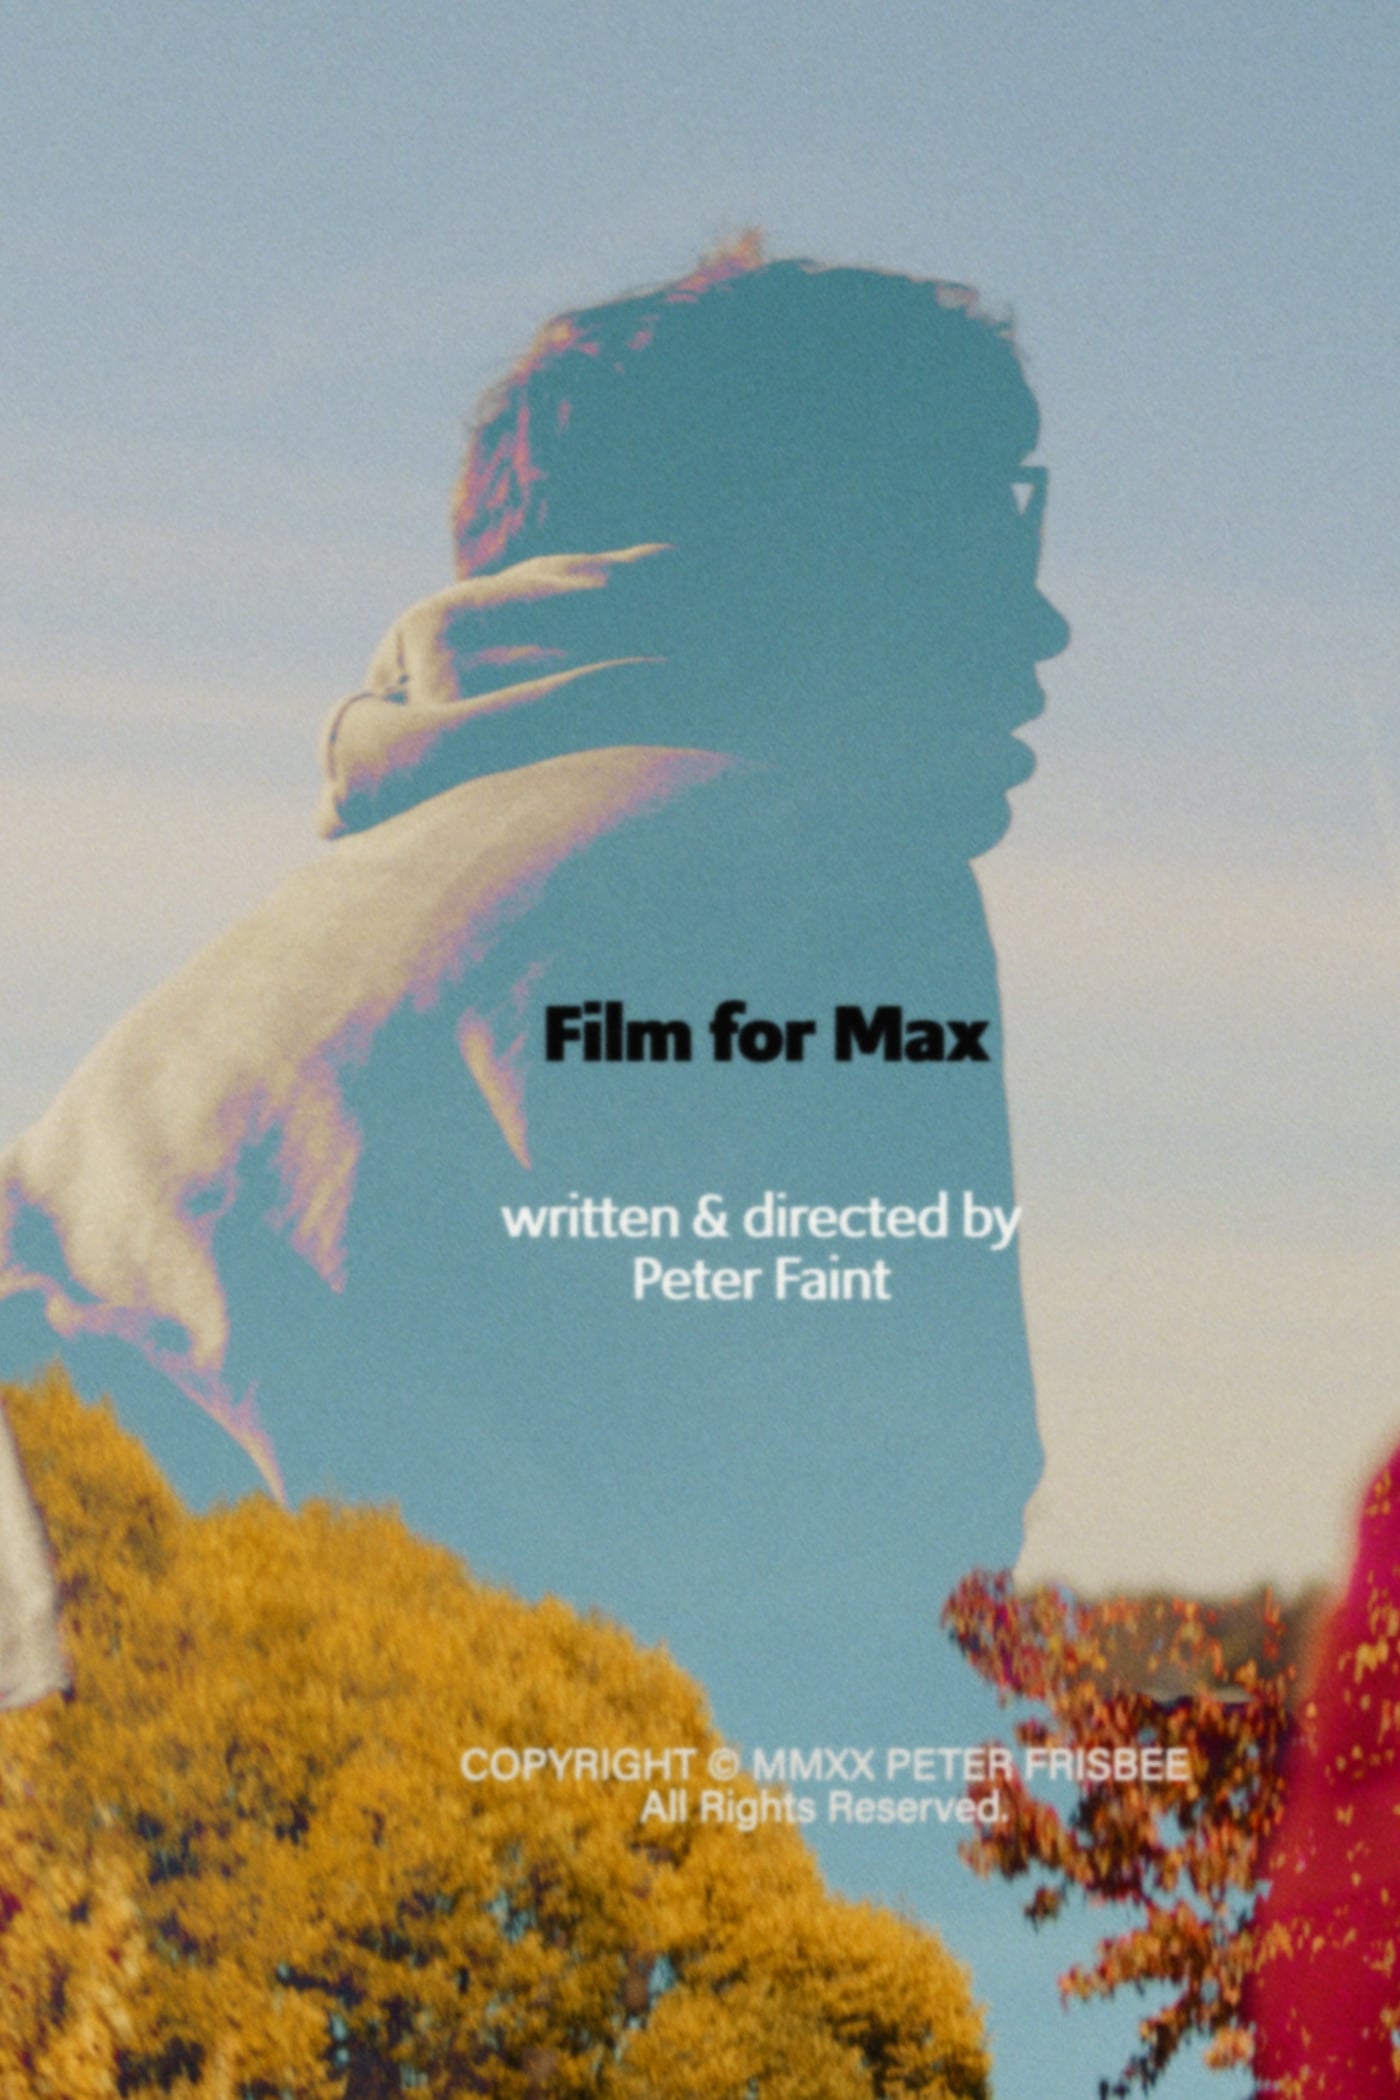 Film for Max